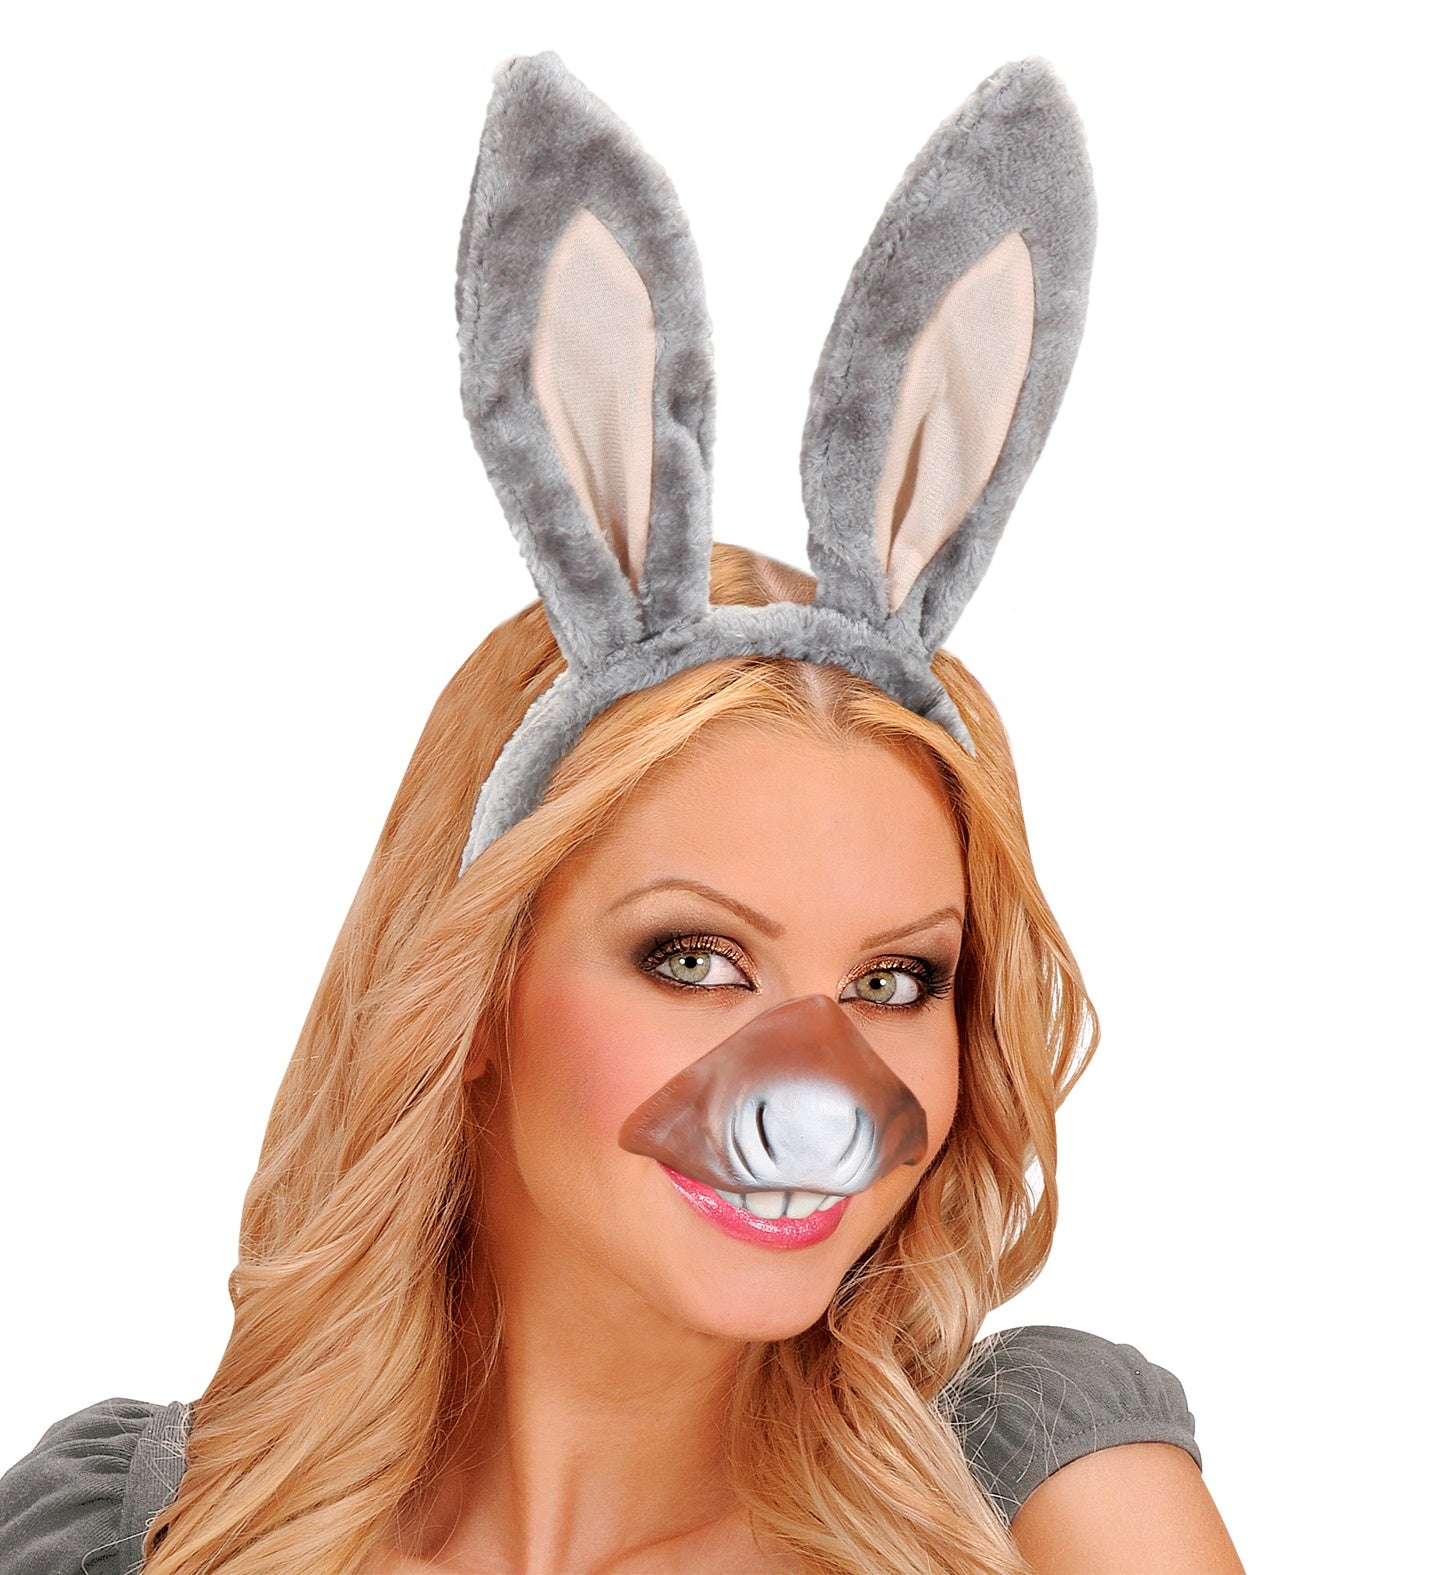 Donkey Ears and Mouth Set Costume accessory